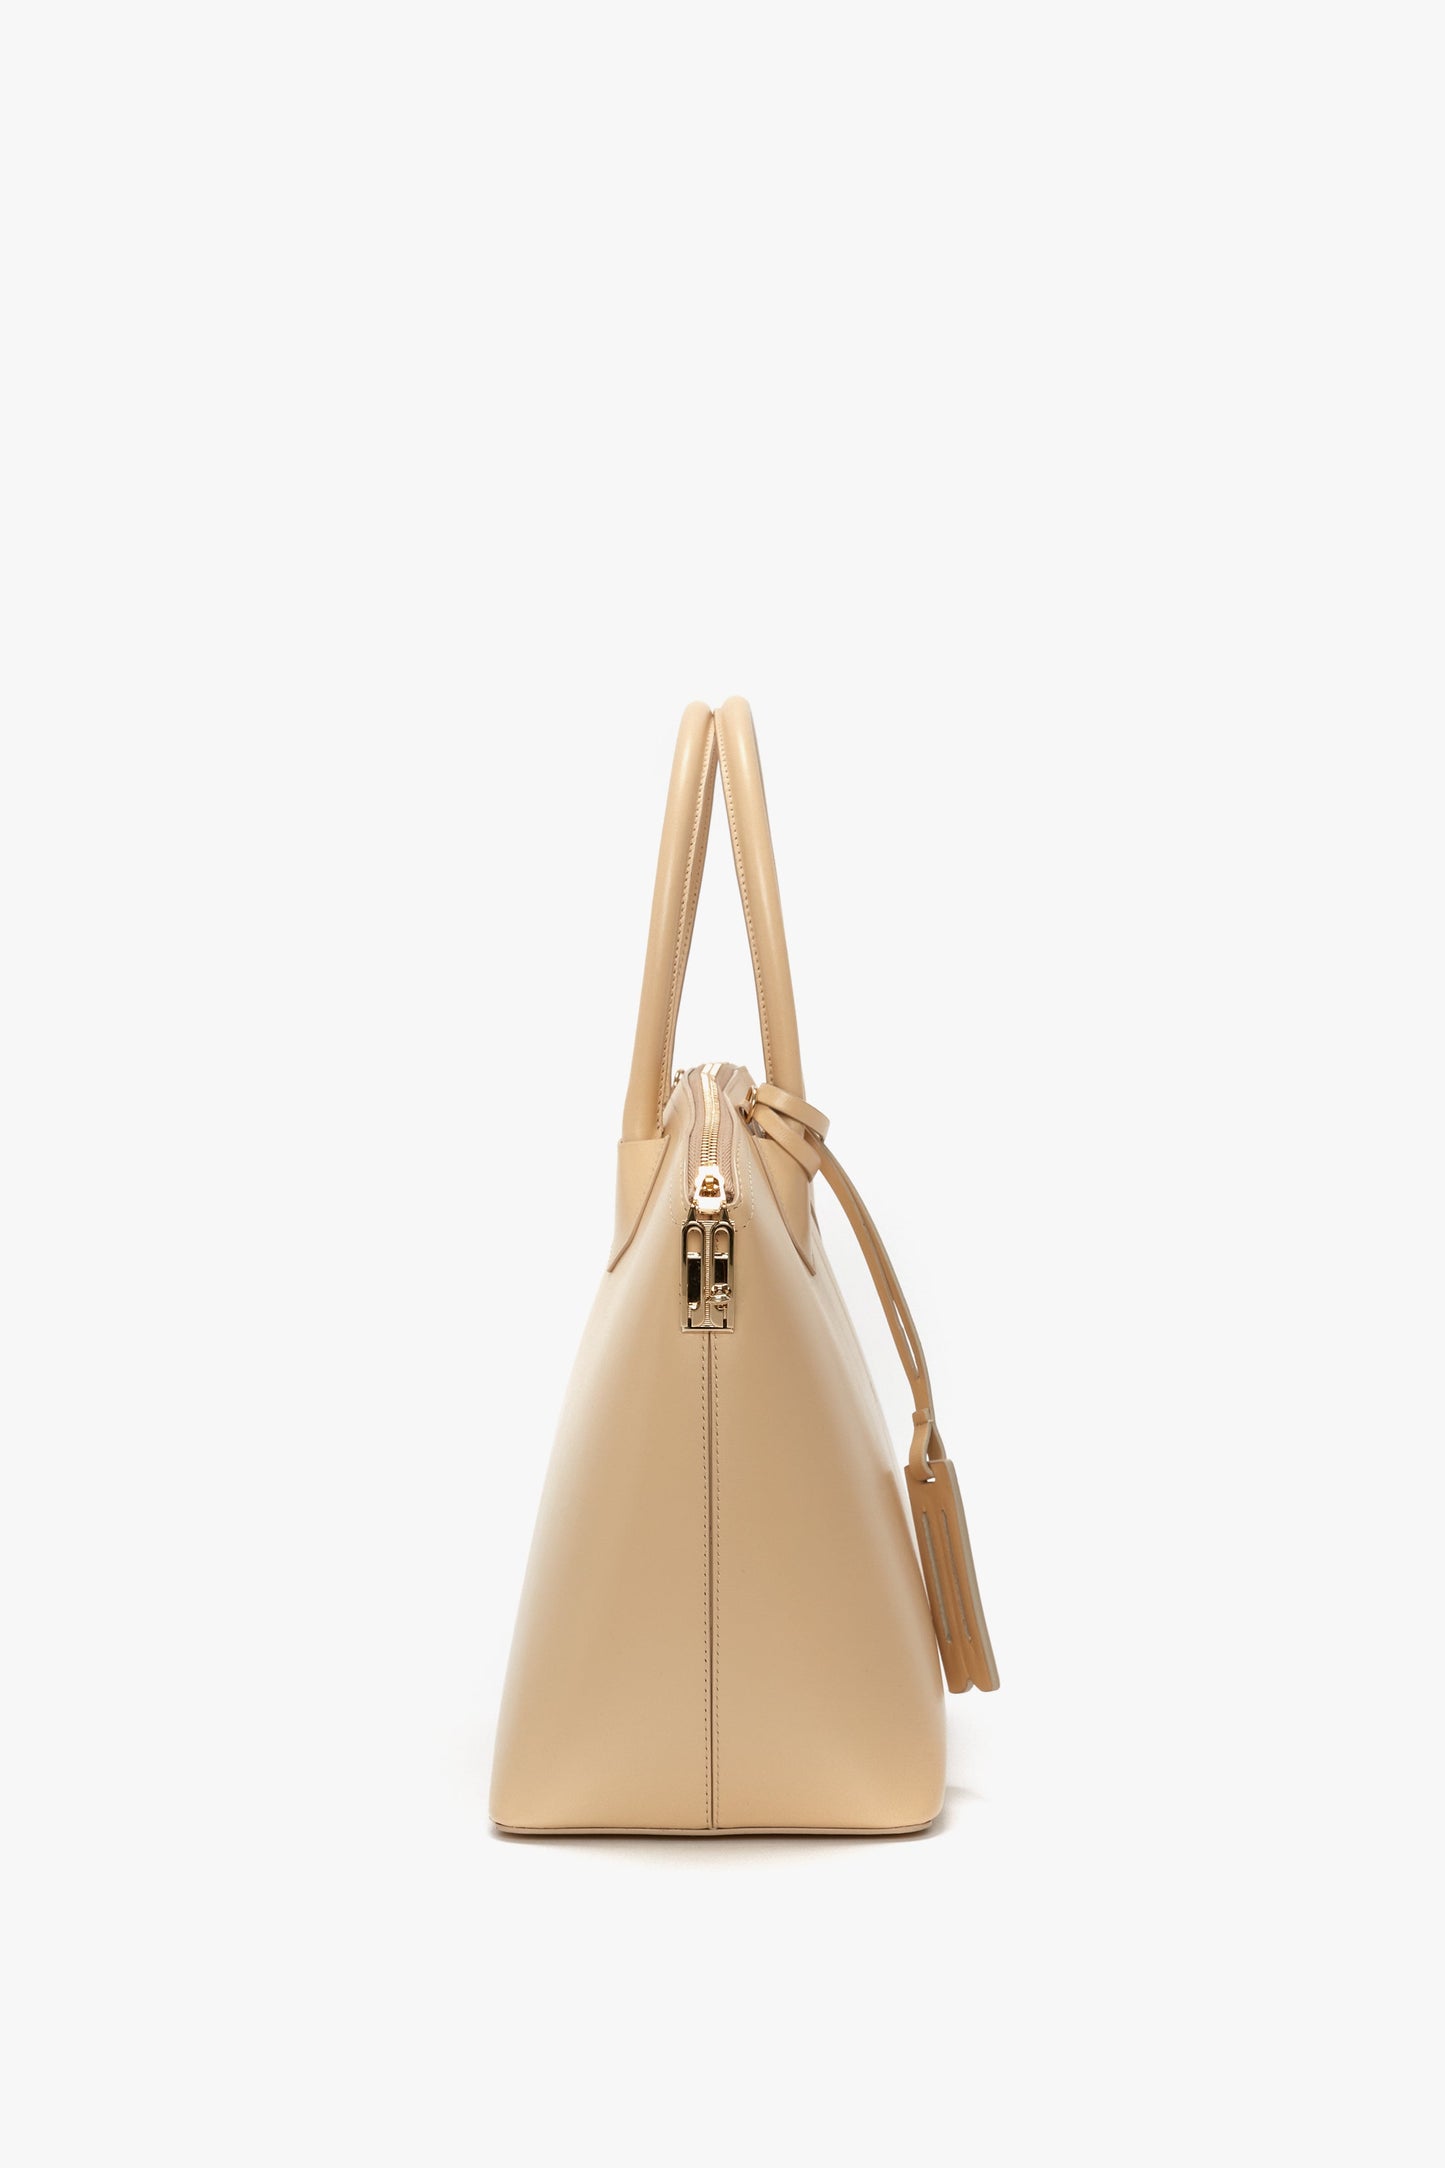 Side view of the Victoria Beckham Victoria Bag In Sesame Leather, a beige handbag with double handles, leather panels, and a tassel decoration, featuring a gold zipper closure against a white background.